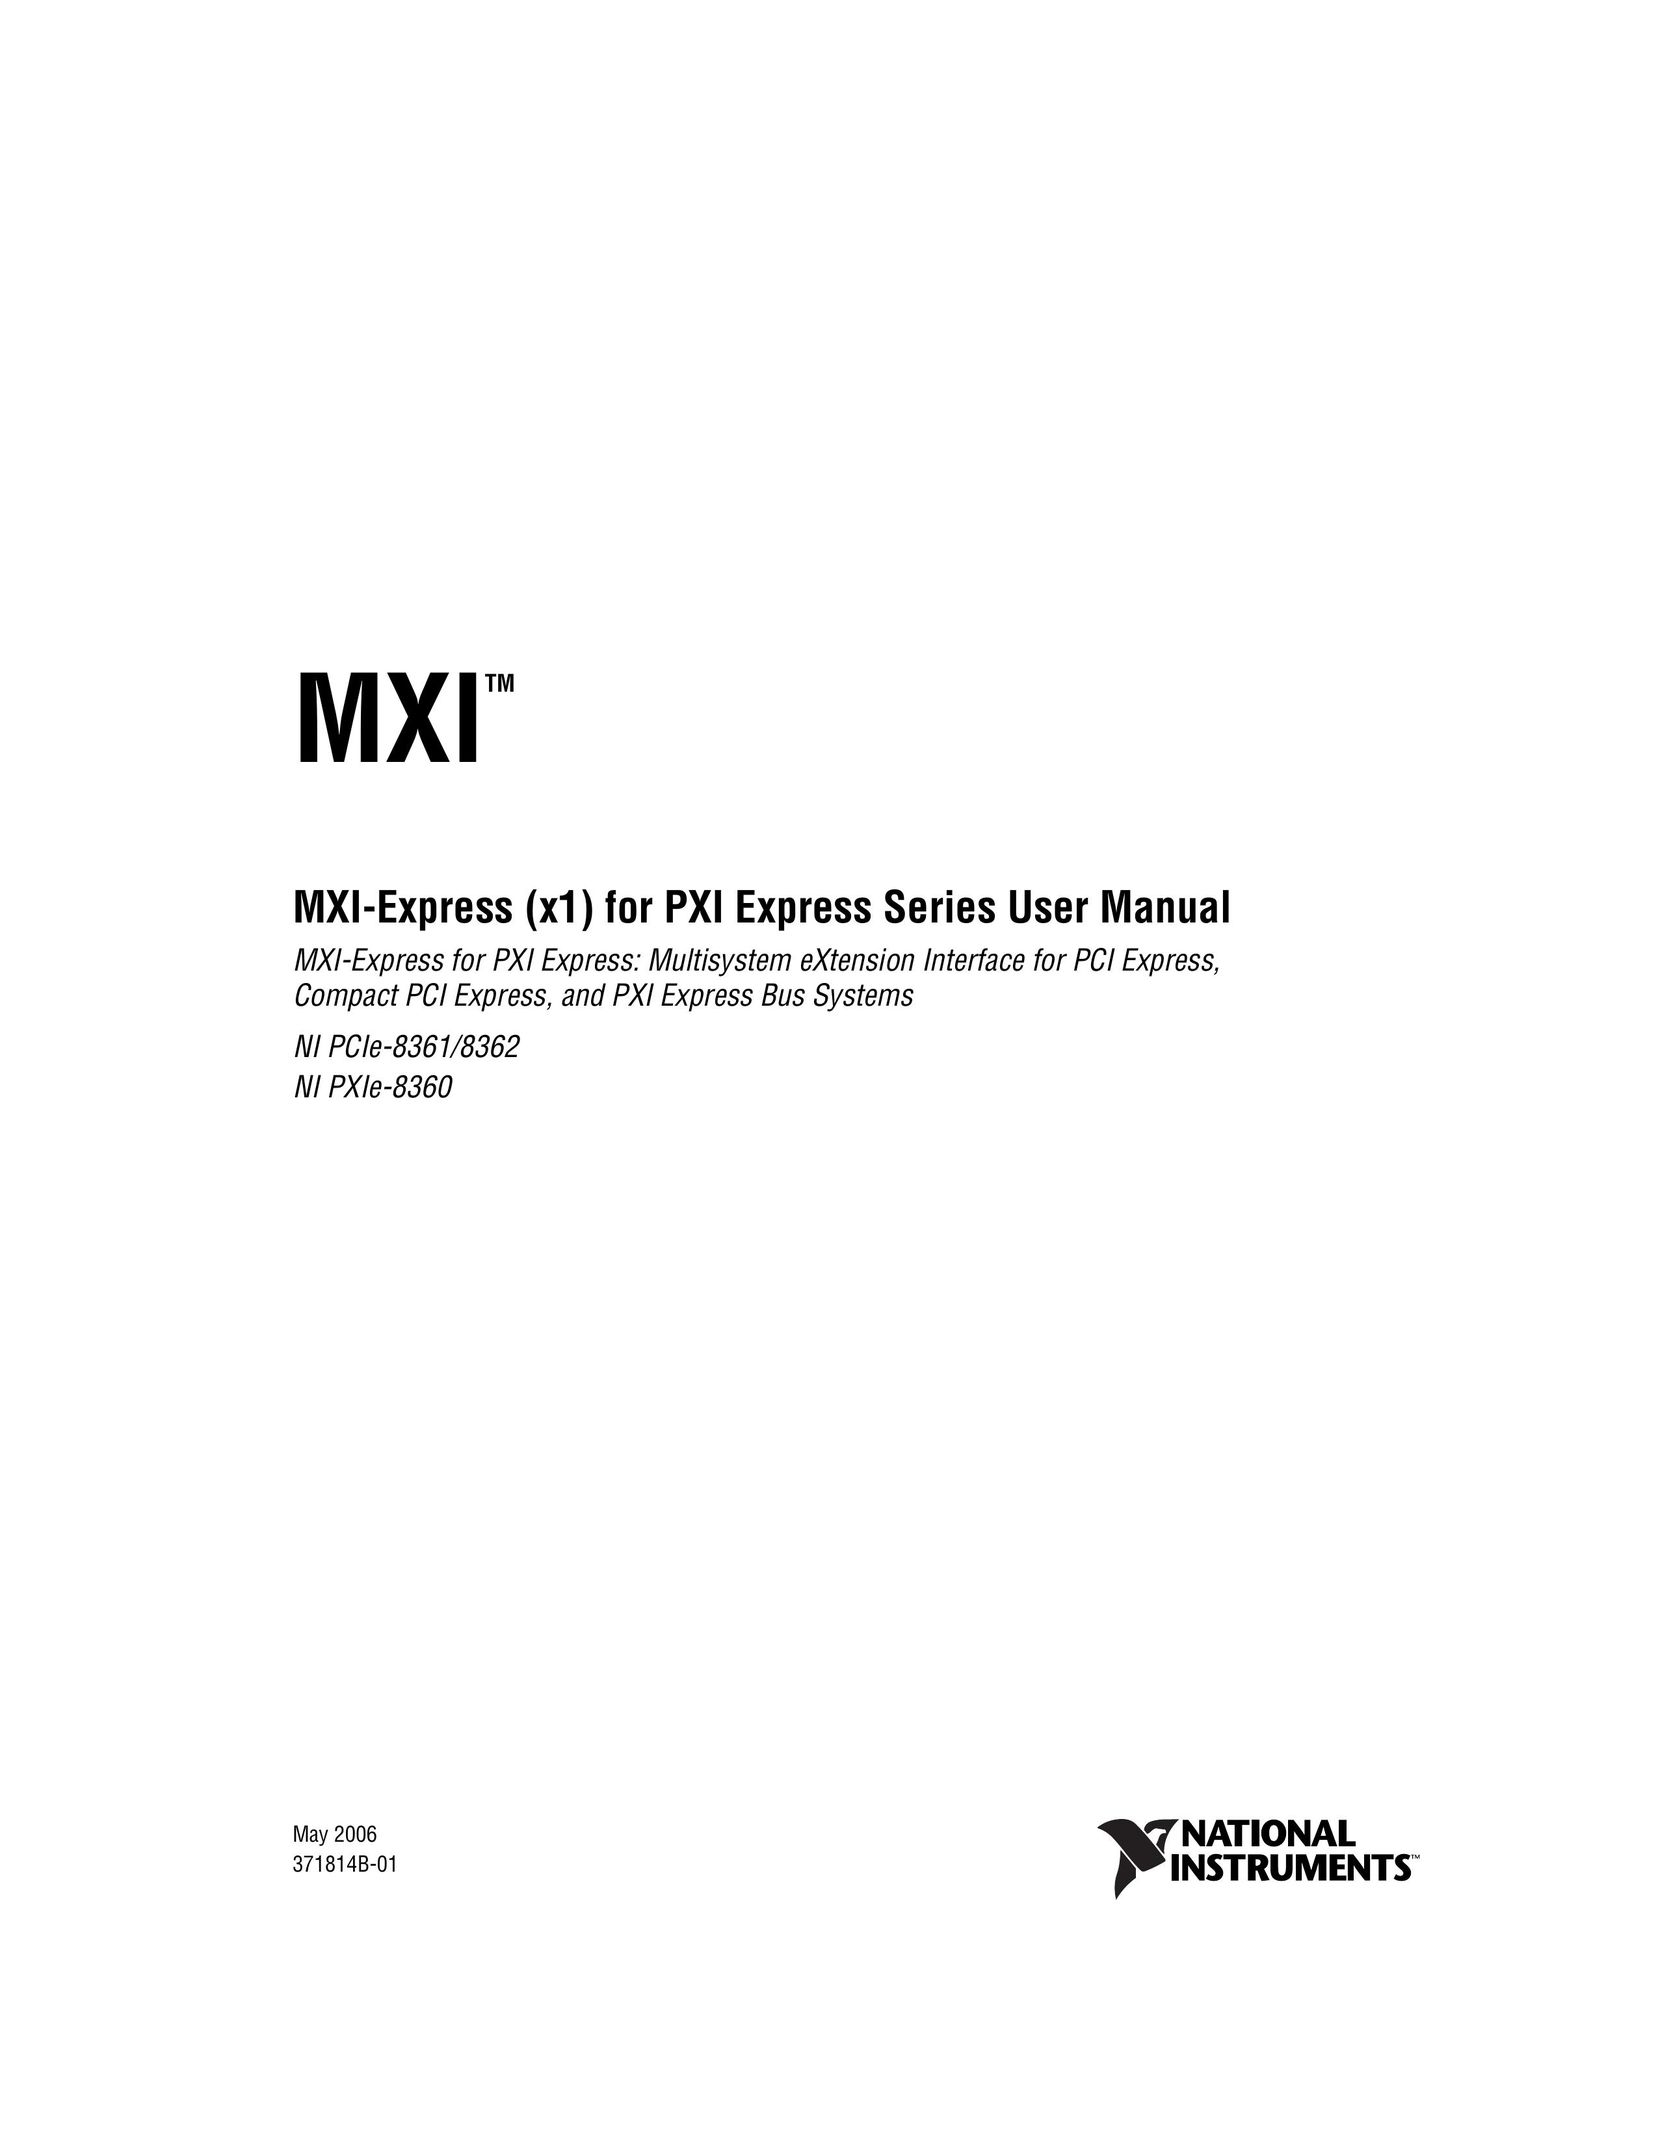 National Instruments MXI Personal Computer User Manual